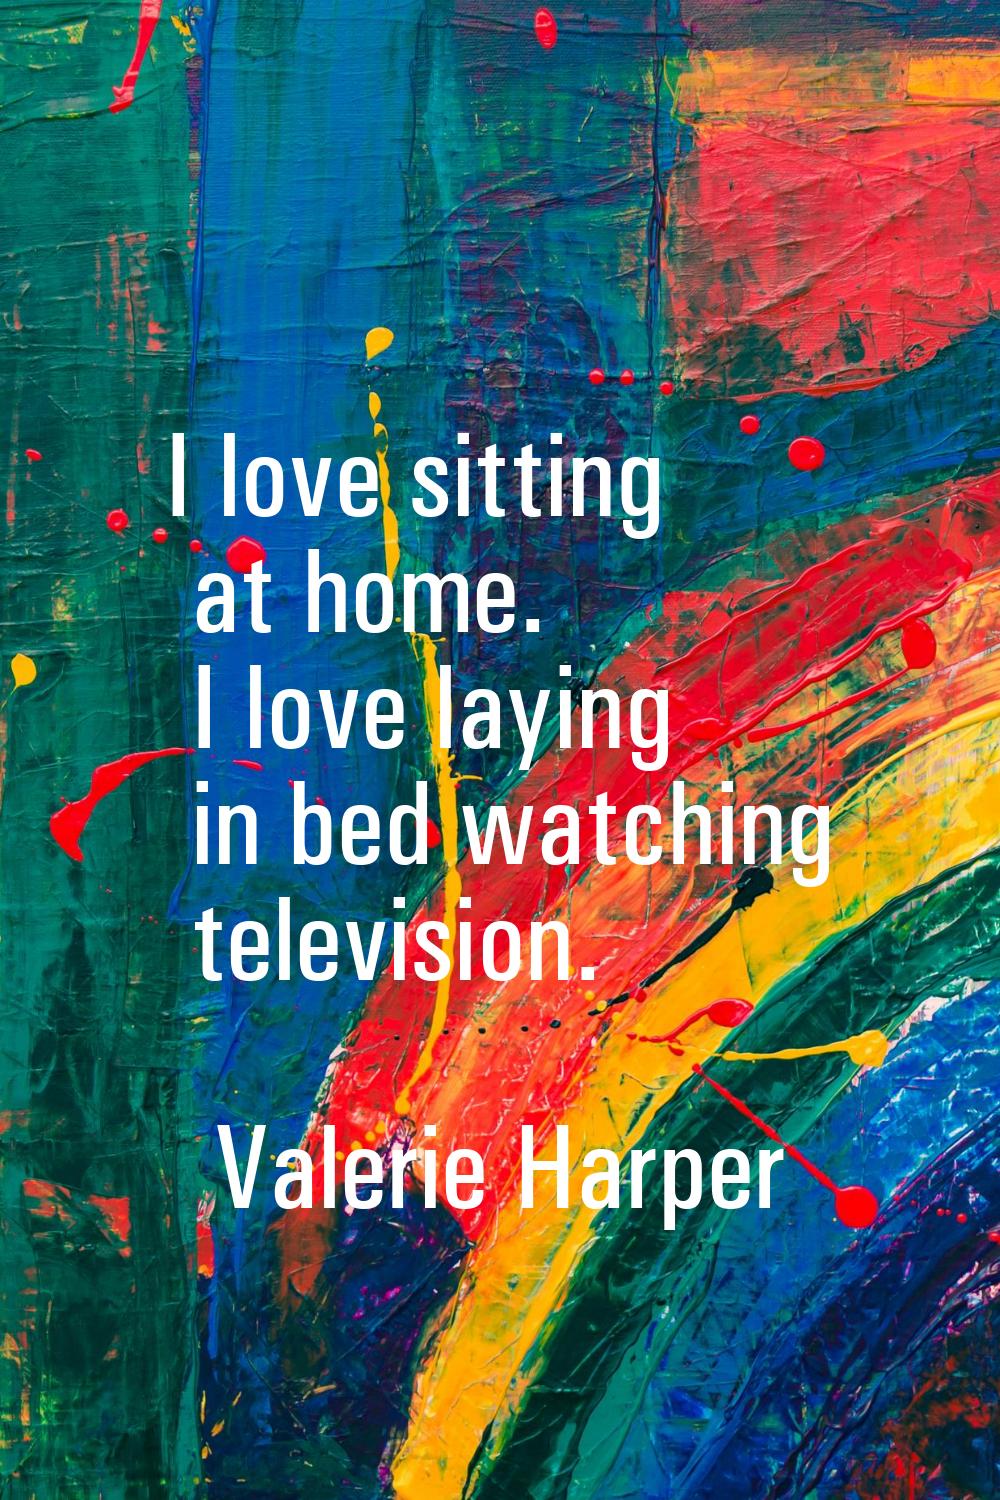 I love sitting at home. I love laying in bed watching television.